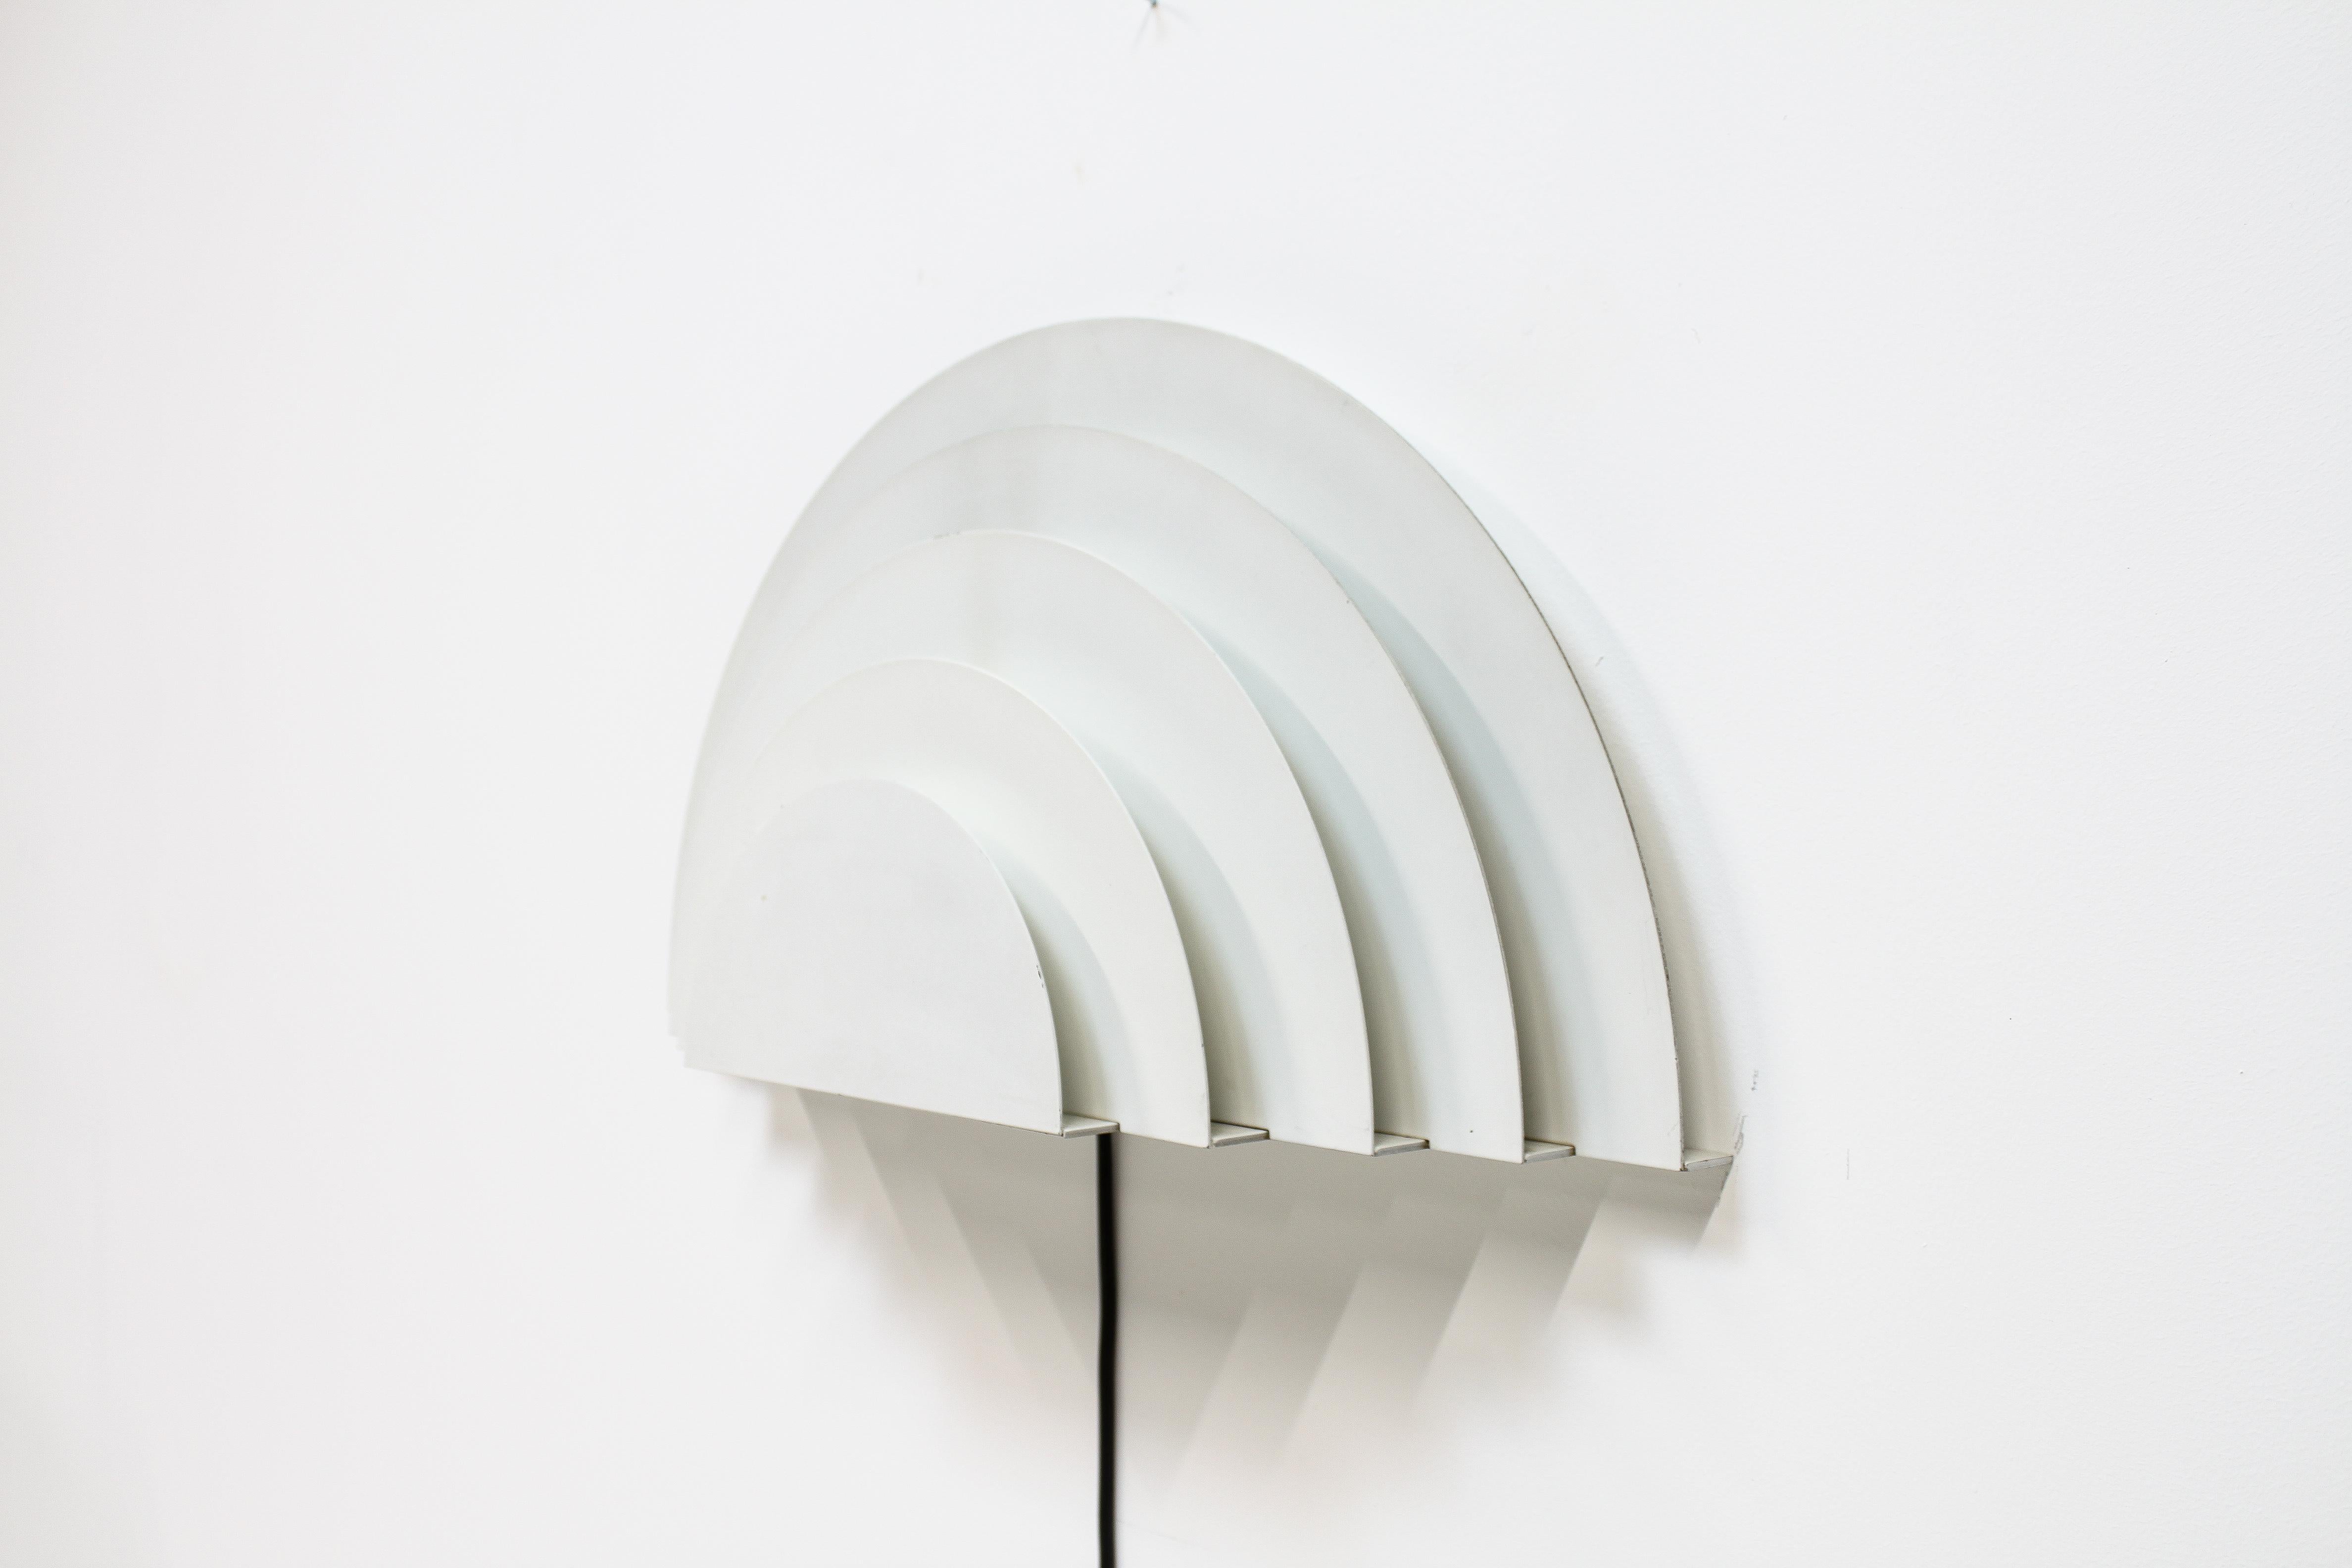 20th Century Meander Wall Sconce by Cesare Casati and Emanuele Ponzio for RAAK, Netherlands